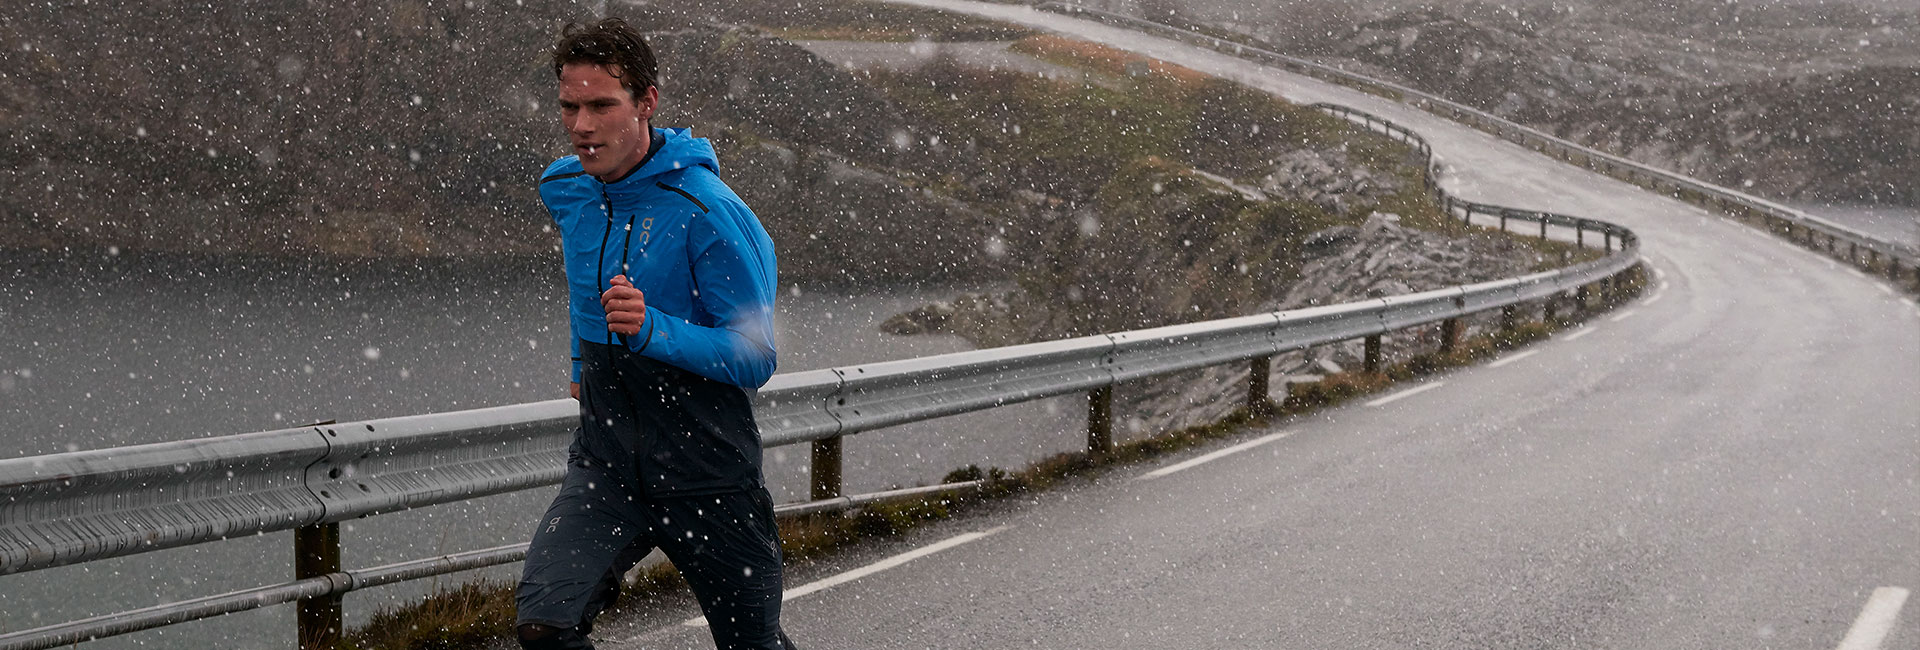 Cold Weather Running With Compression Tights Vs. Sweatpants